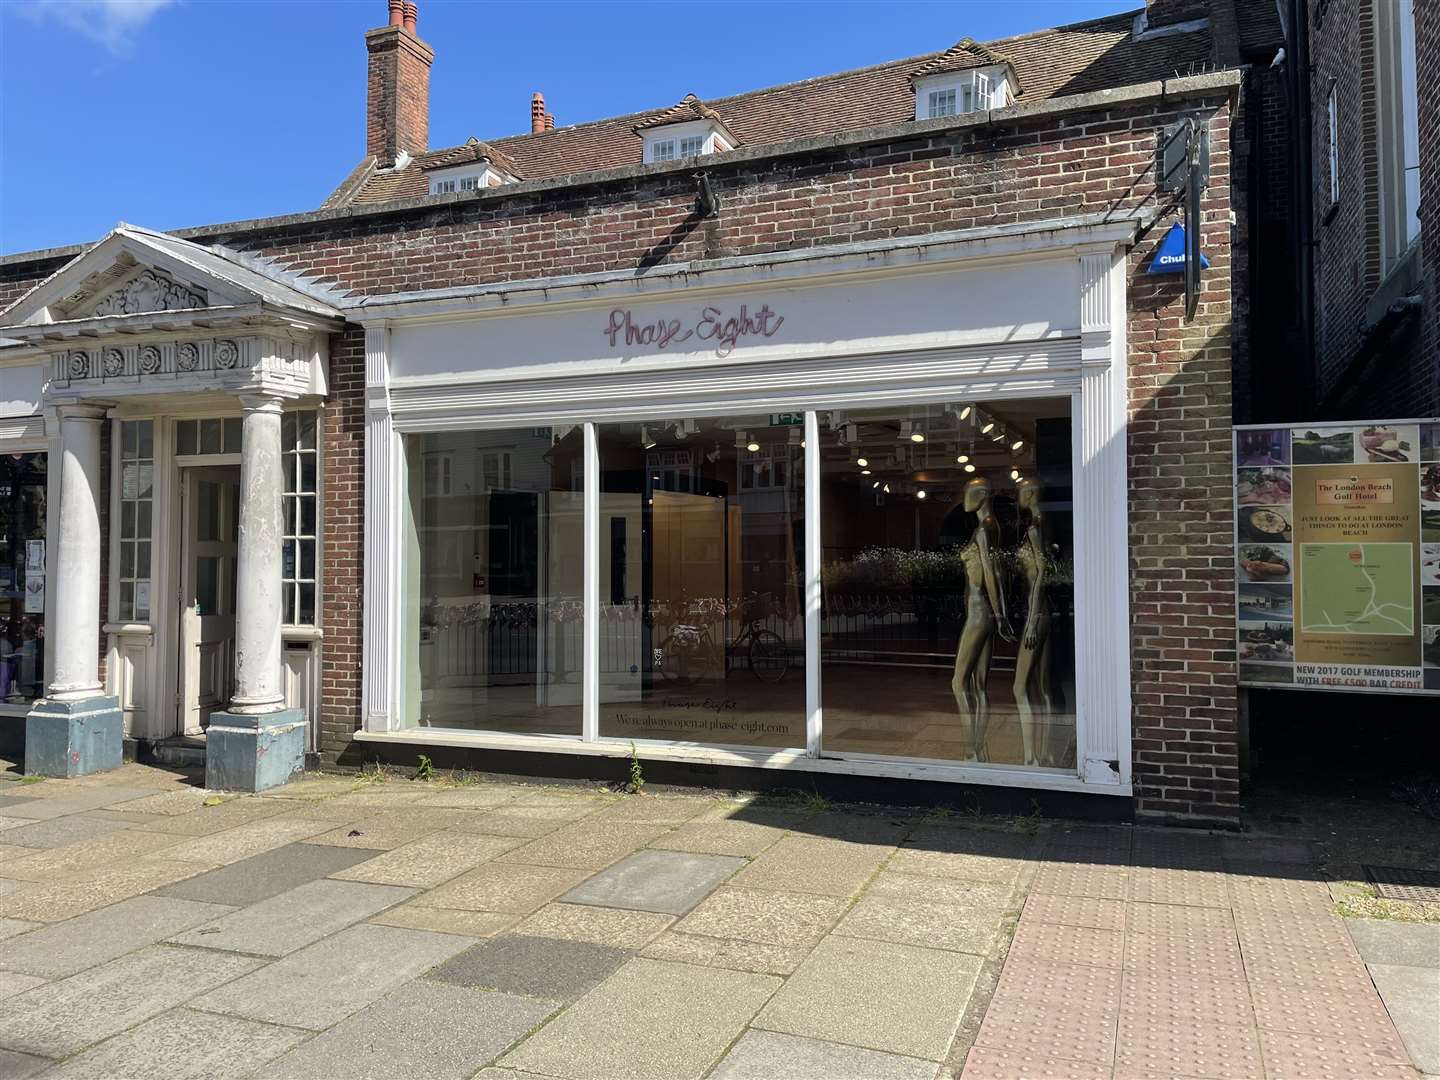 Phase Eight has suddenly closed its doors in Tenterden